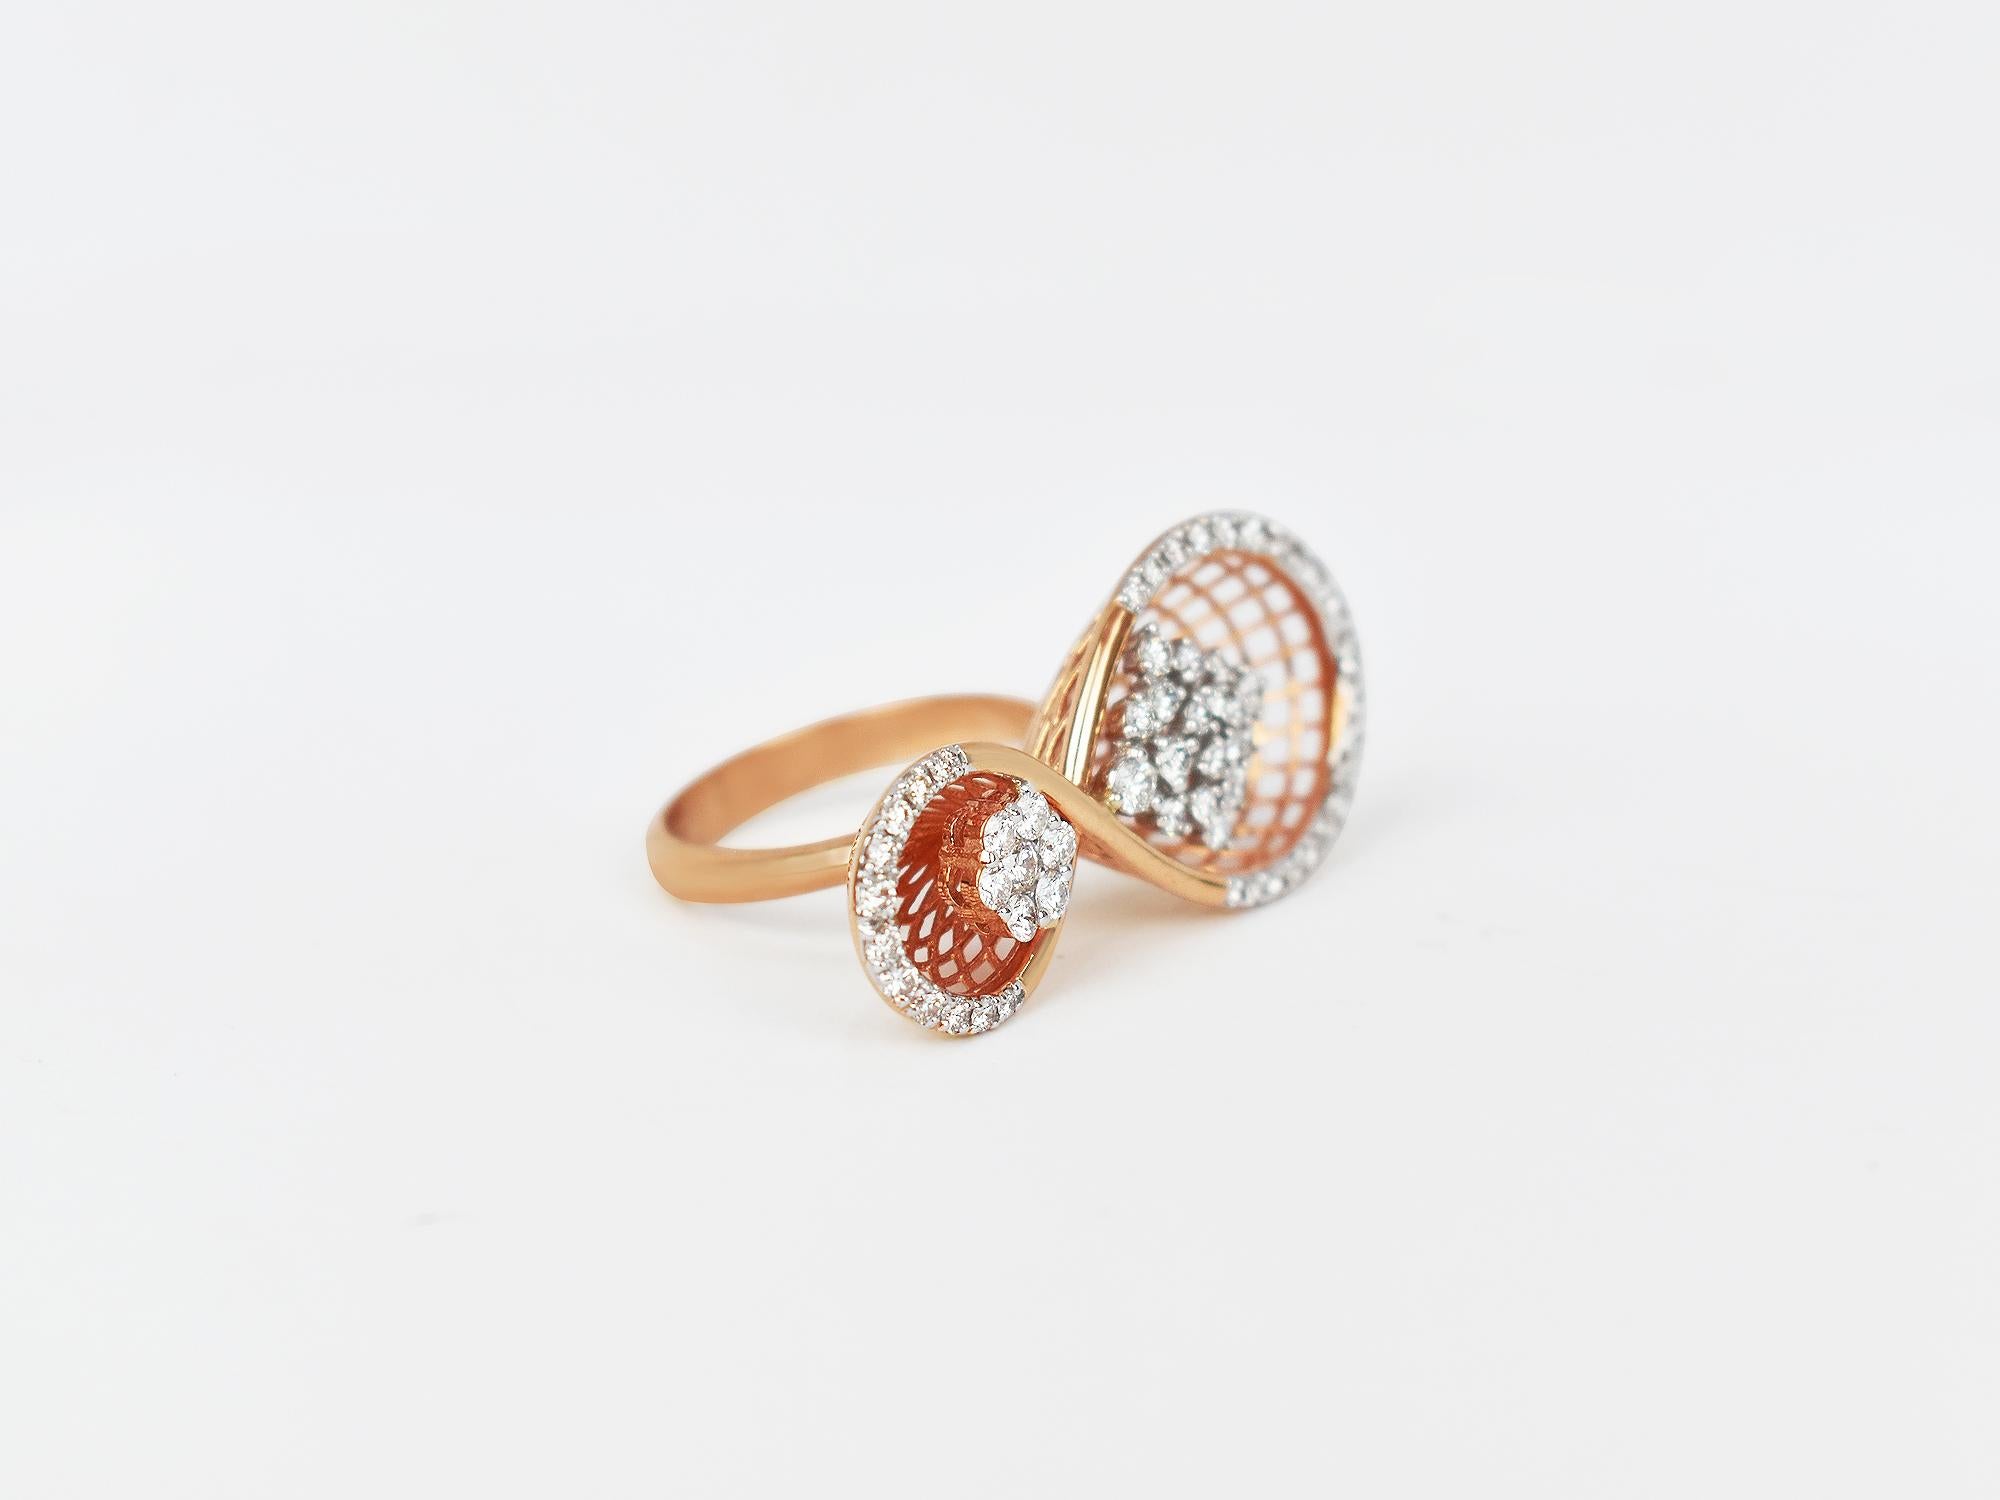 18k Ring Rose Gold Ring Diamond Ring  Fancy Gold Diamond Ring
             A fashion Art Nouveau infinity open filigree ring is fully paved with brilliant-cut diamonds set in stunning 18K  Rose gold. Sculptural arrangements of diamonds designed to